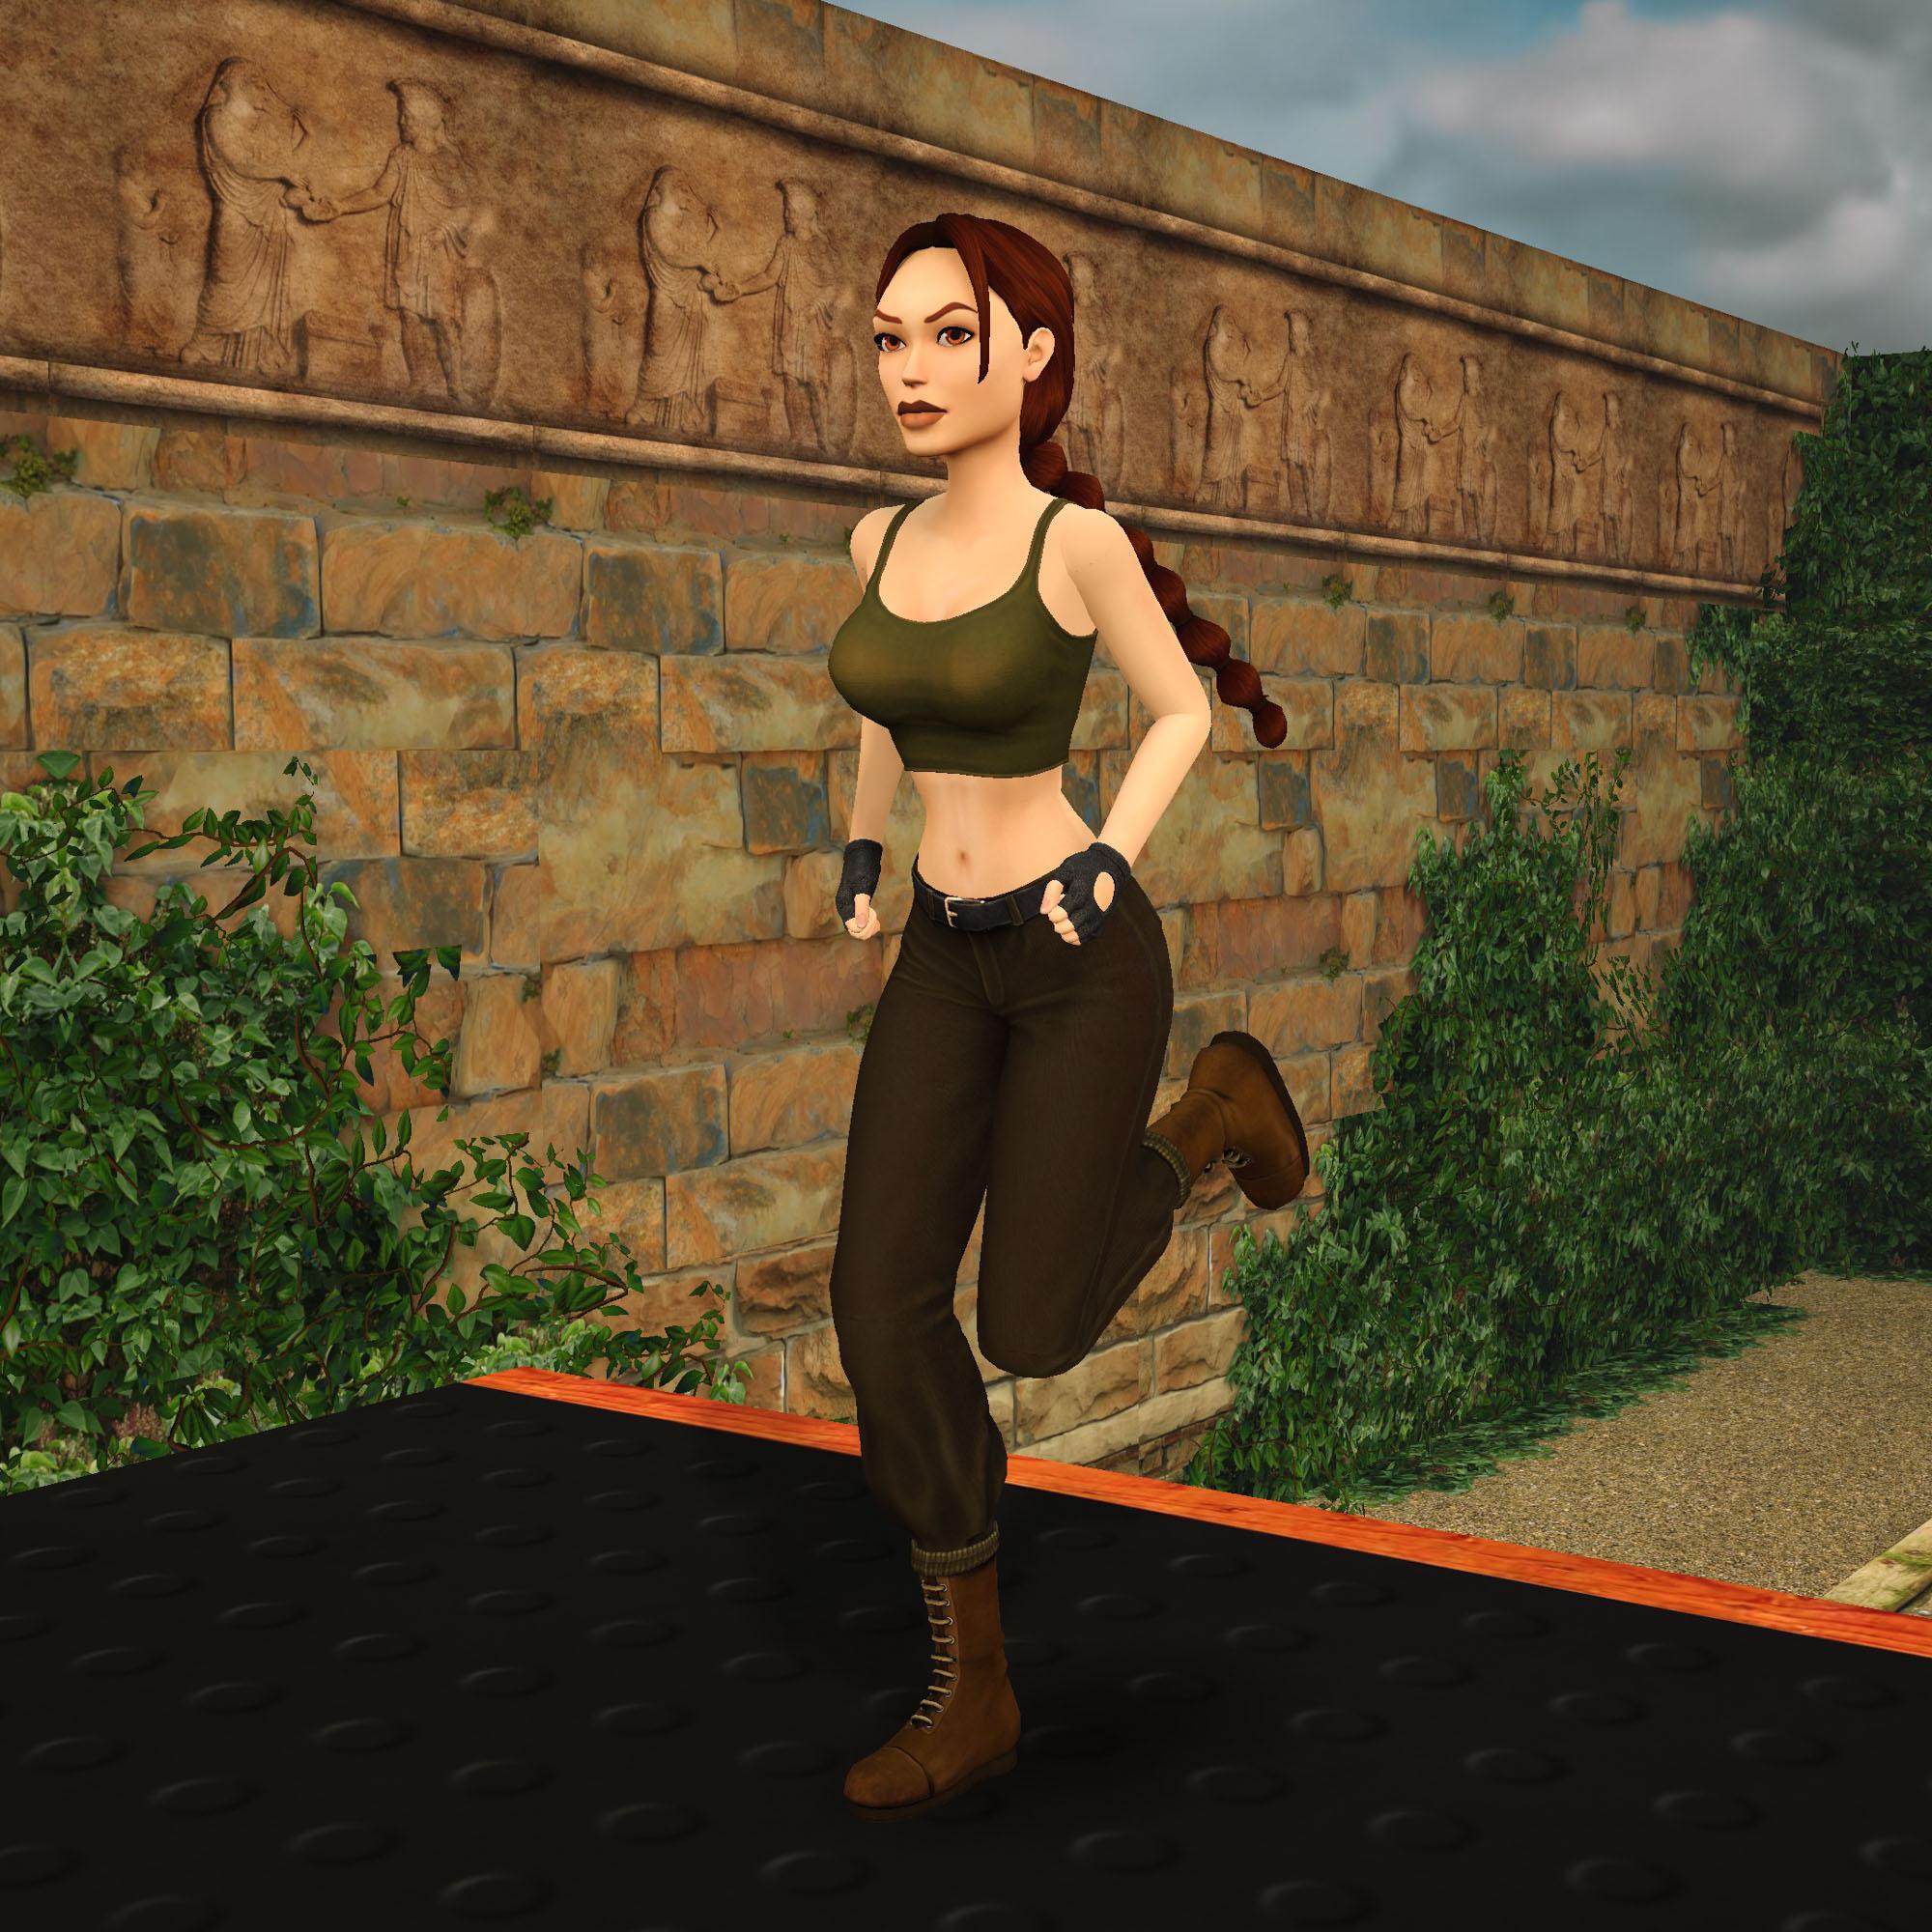 Lara Croft is sporting the Training2 outfit in the assault course at Croft Manor.